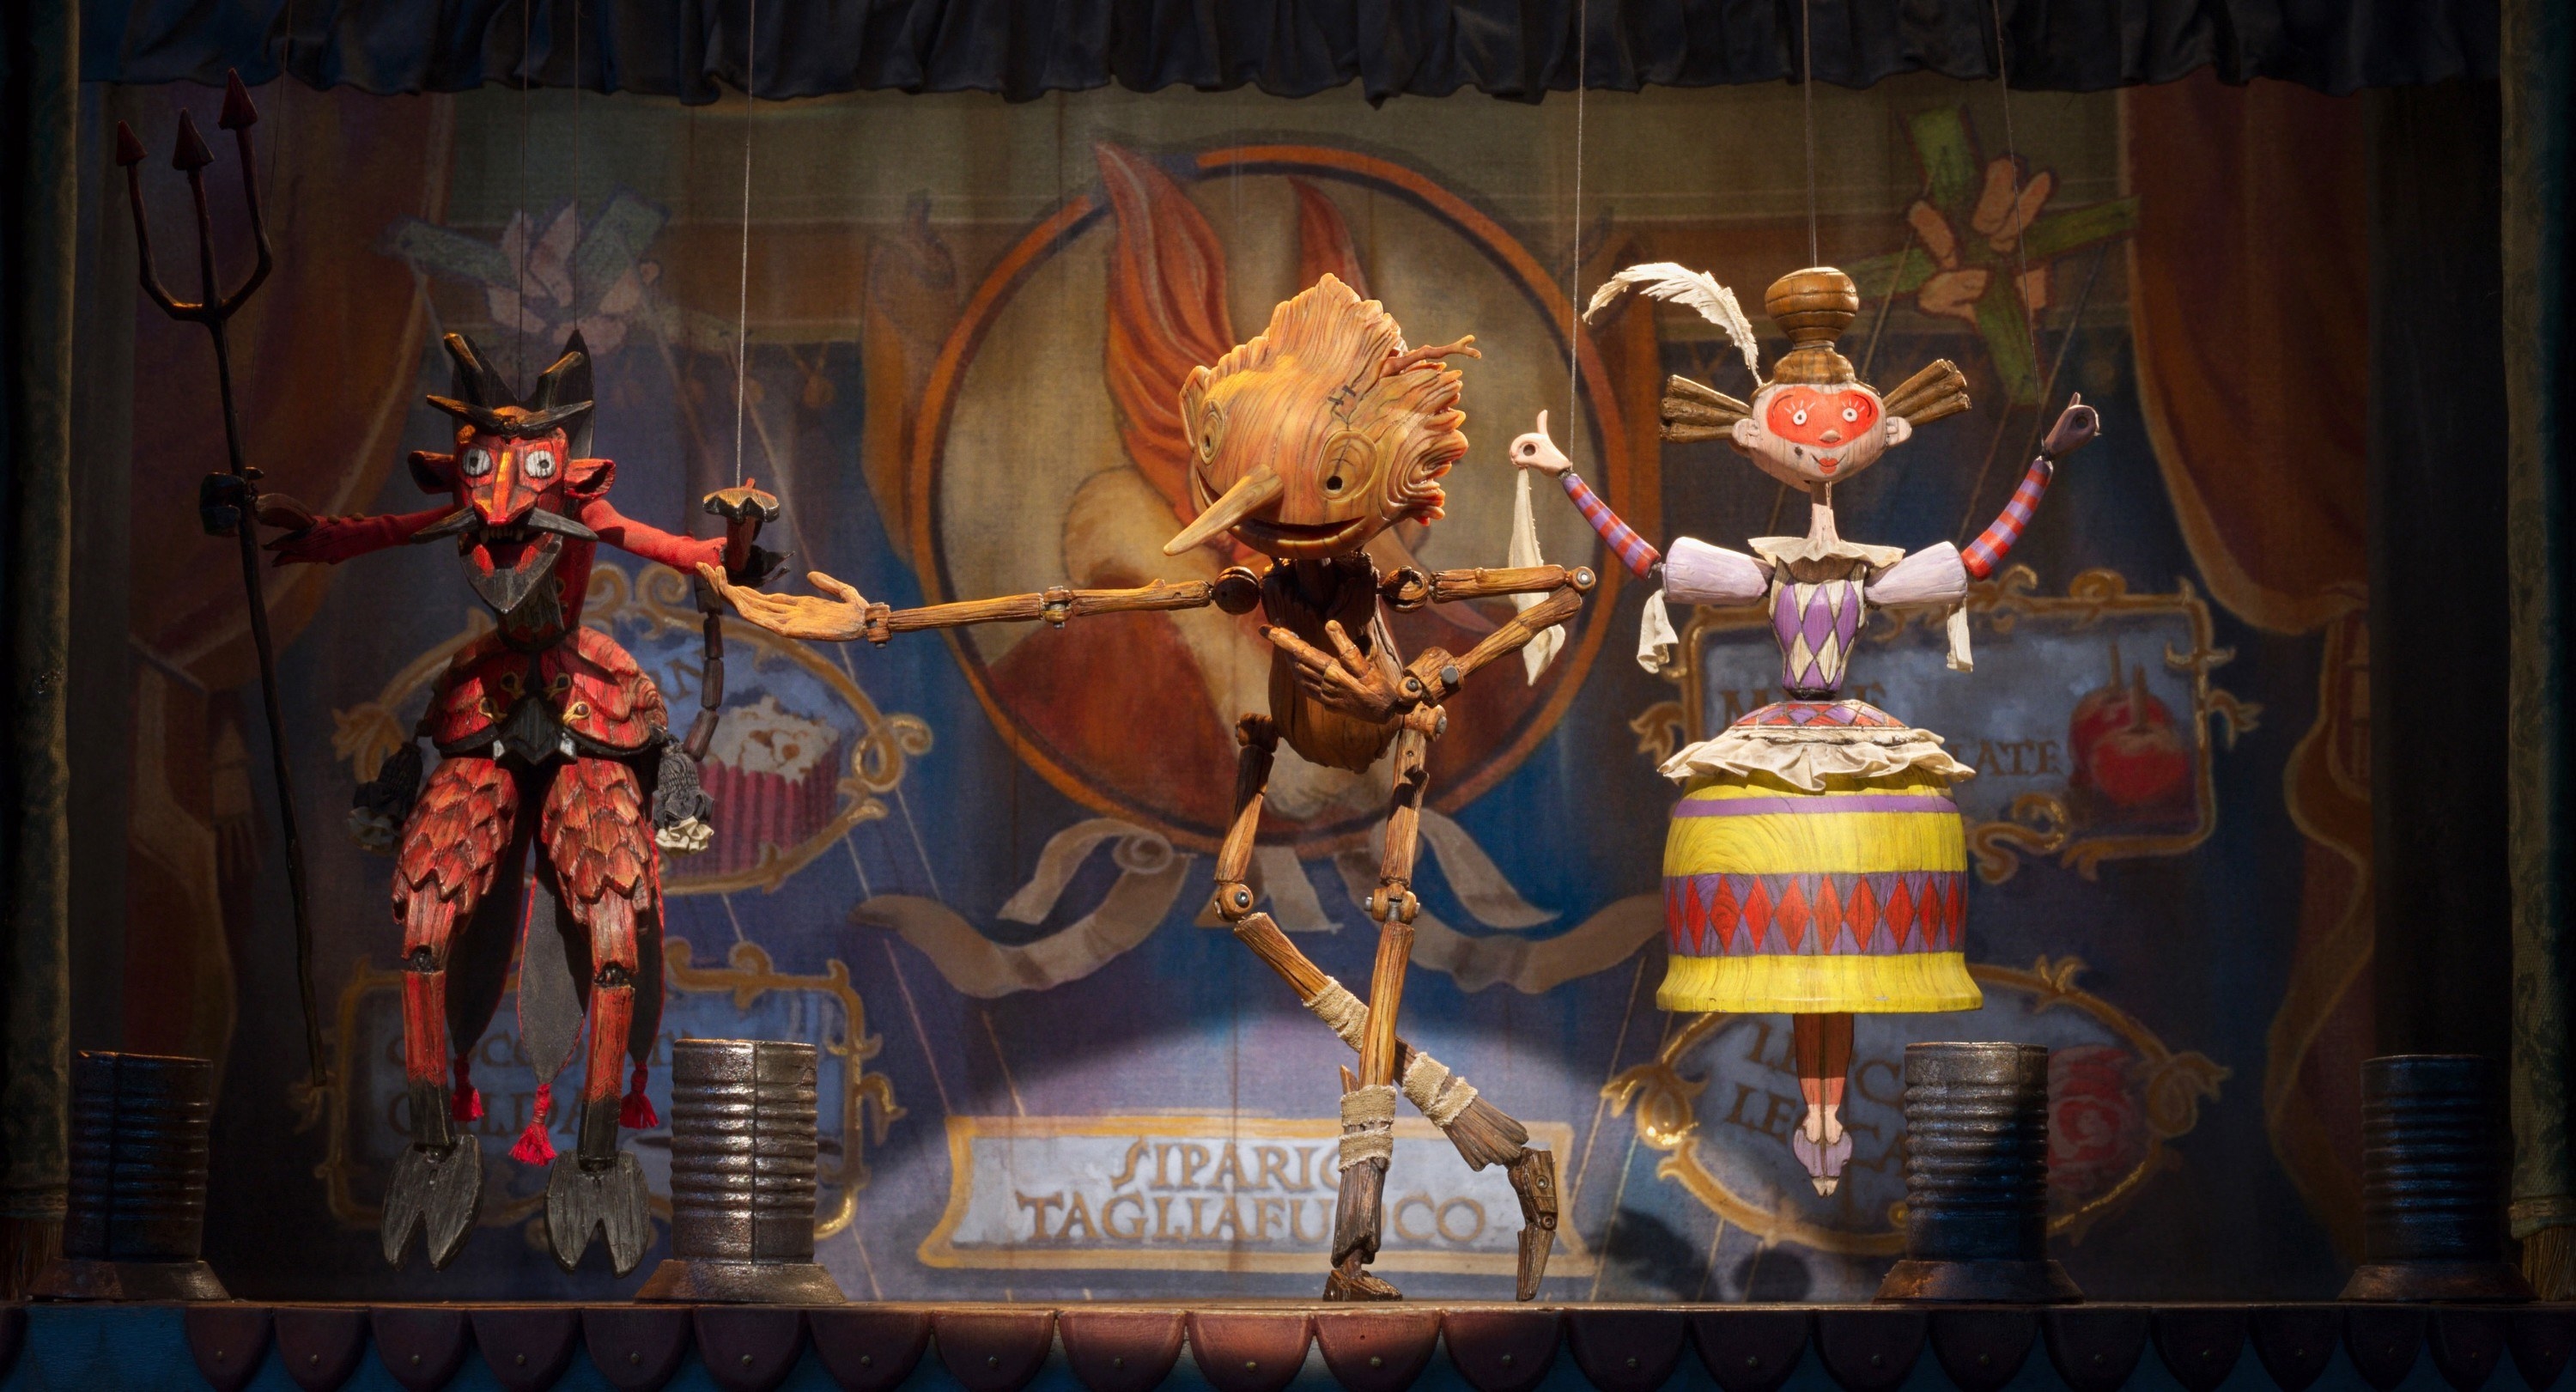 A puppet boy dances on stage with other puppets